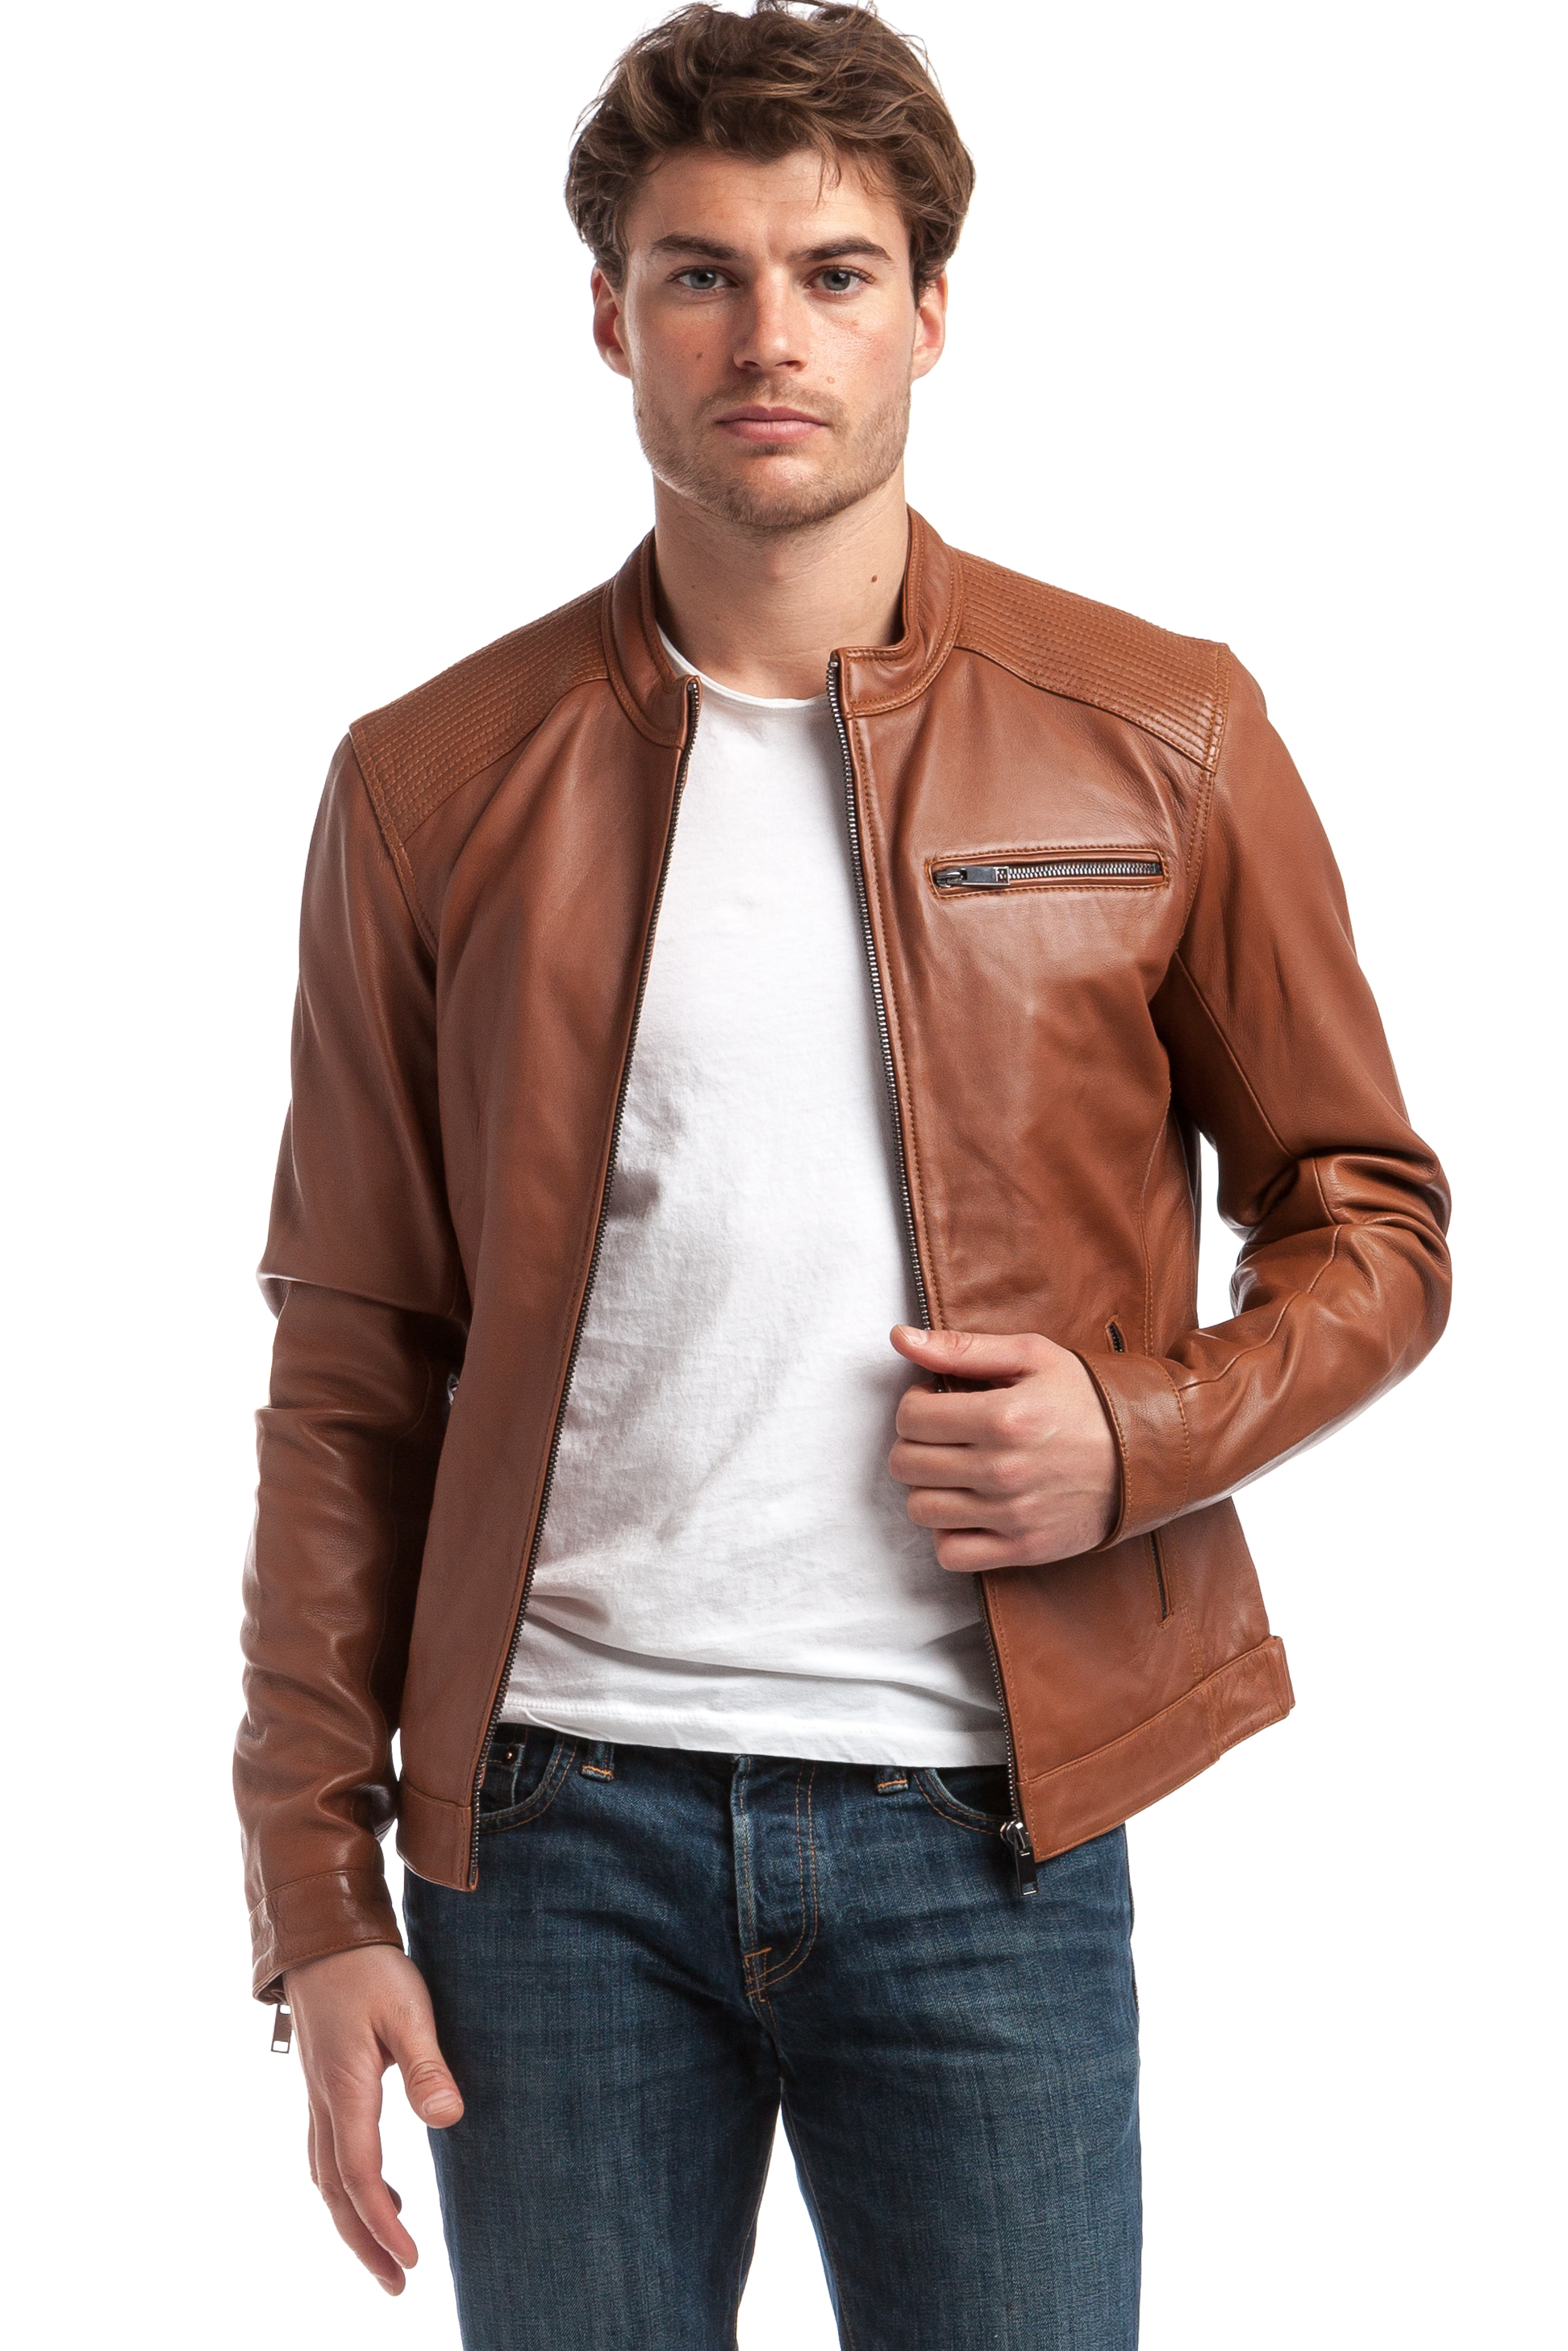 breng de actie werk Levendig Chyston on Twitter: "Alban Men's Round Neck Jacket Black - Chyston Leather  Dry clean only 100% Polyester jacket #mencollection #clothes #clothingbrand  #clothesaddict #fashionstyle #jackets #clothesforsale #clothesformen  #menscollection #mensfashion ...